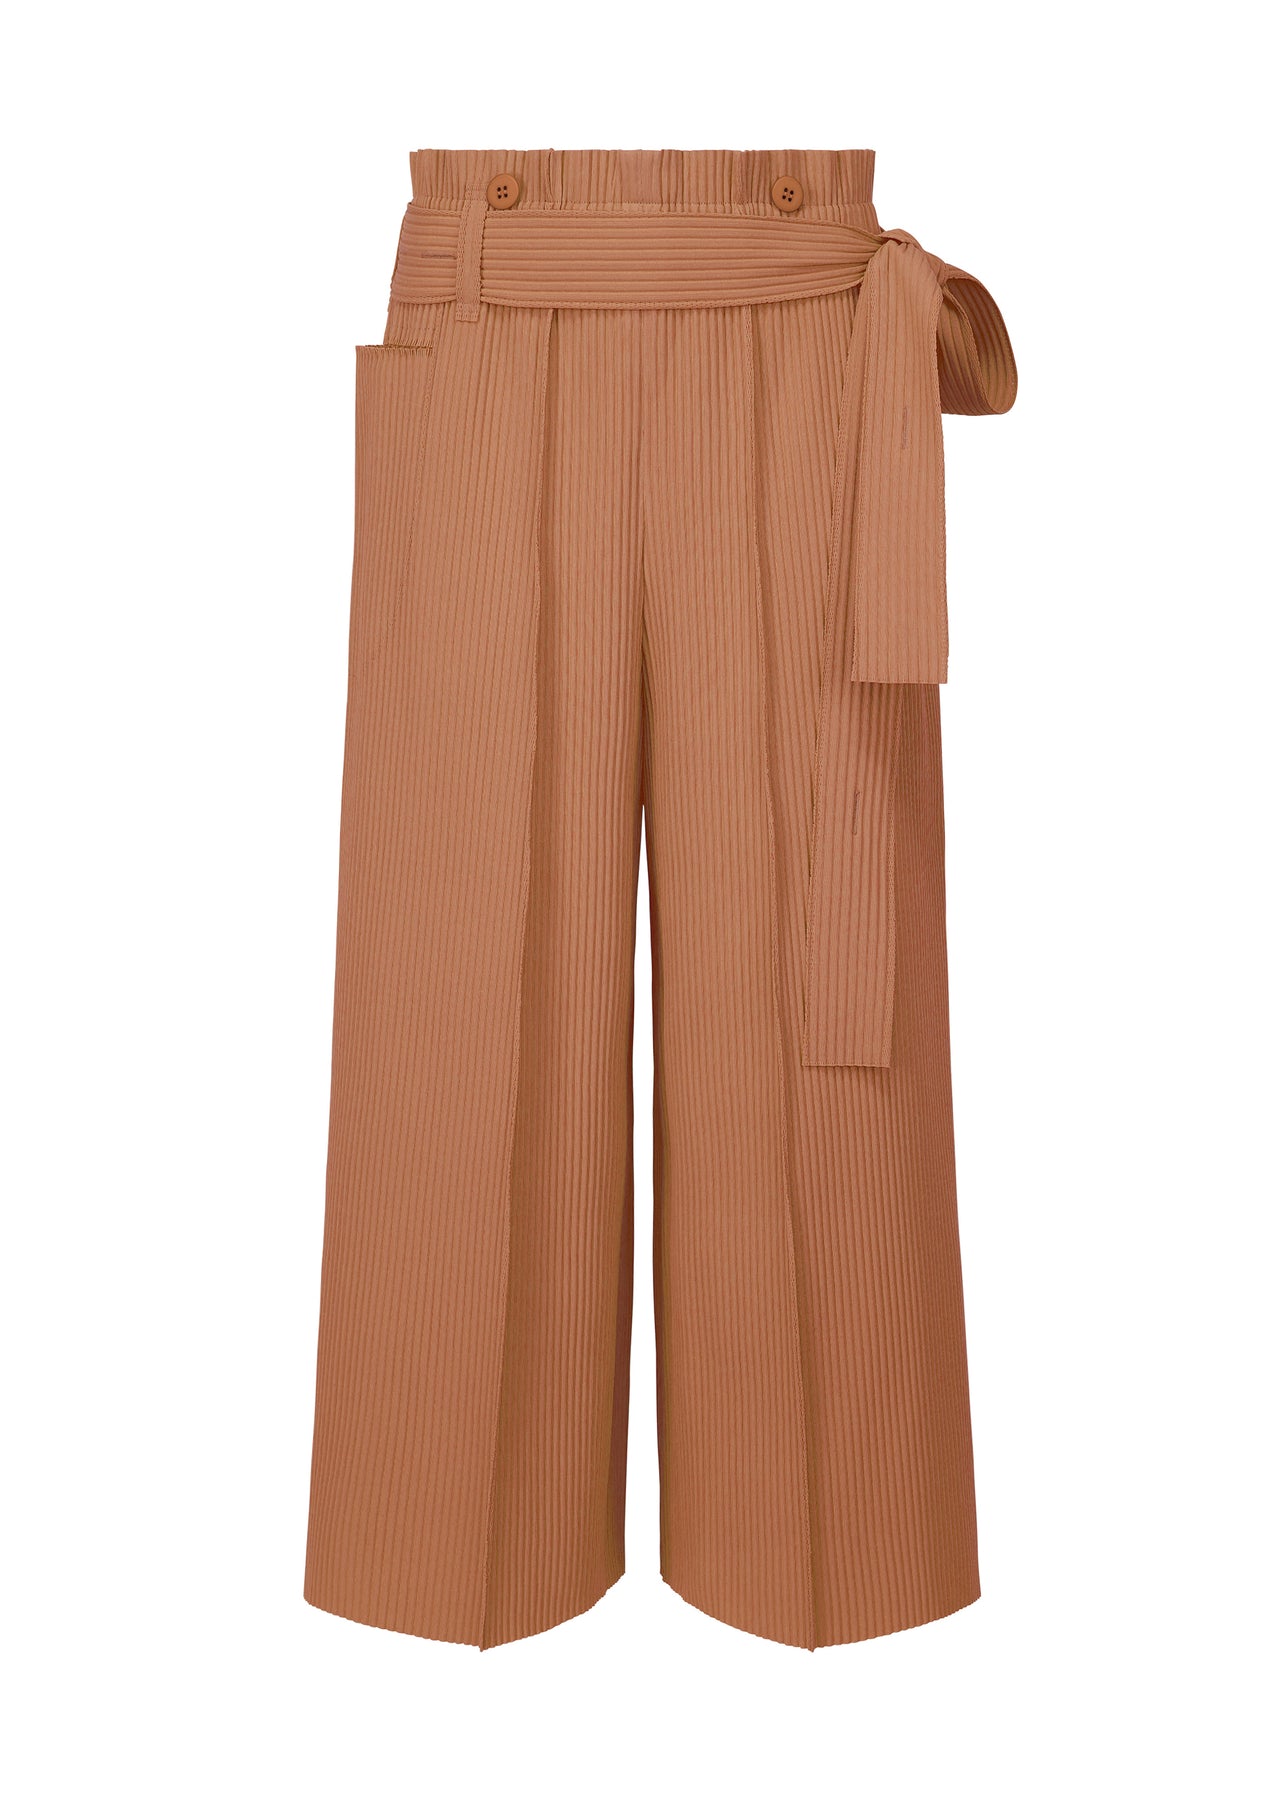 FINE KNIT PLEATS BOTTOMS 1 | The official ISSEY MIYAKE ONLINE 